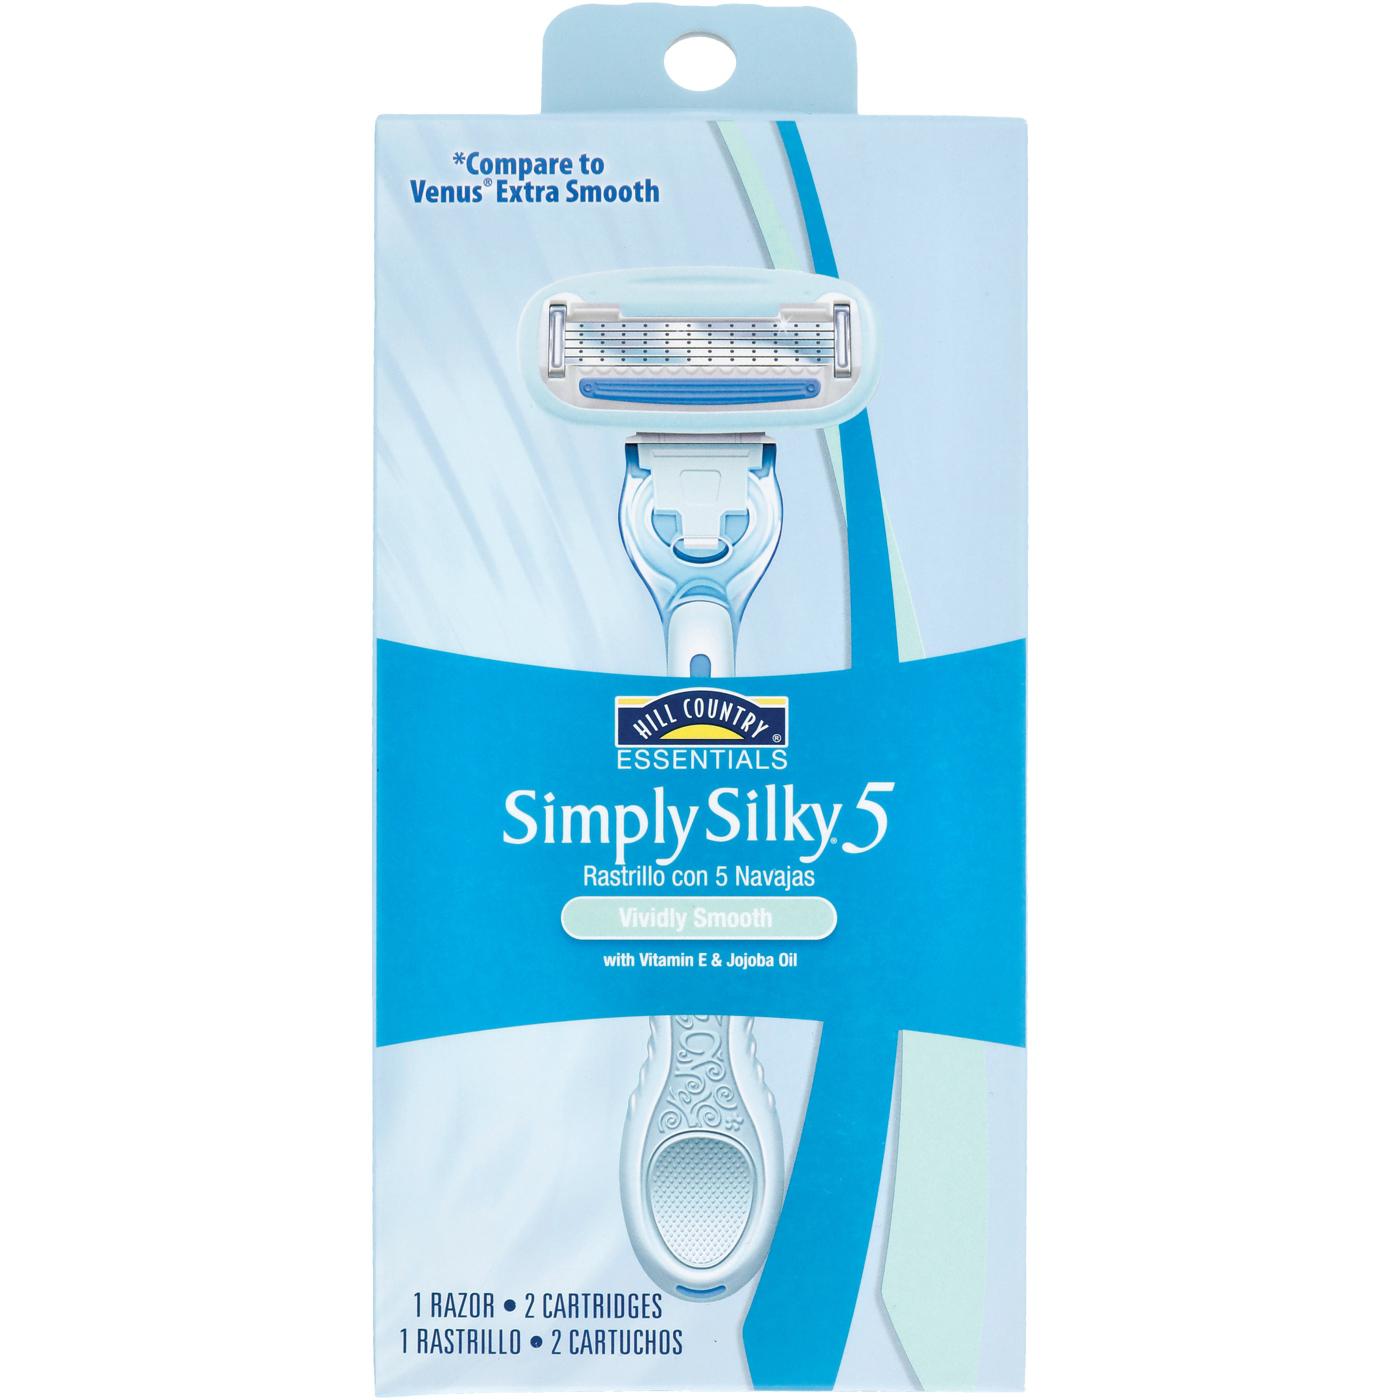 Hill Country Essentials Simply Silky 5 Women's Razor With 2 Cartridges; image 1 of 5